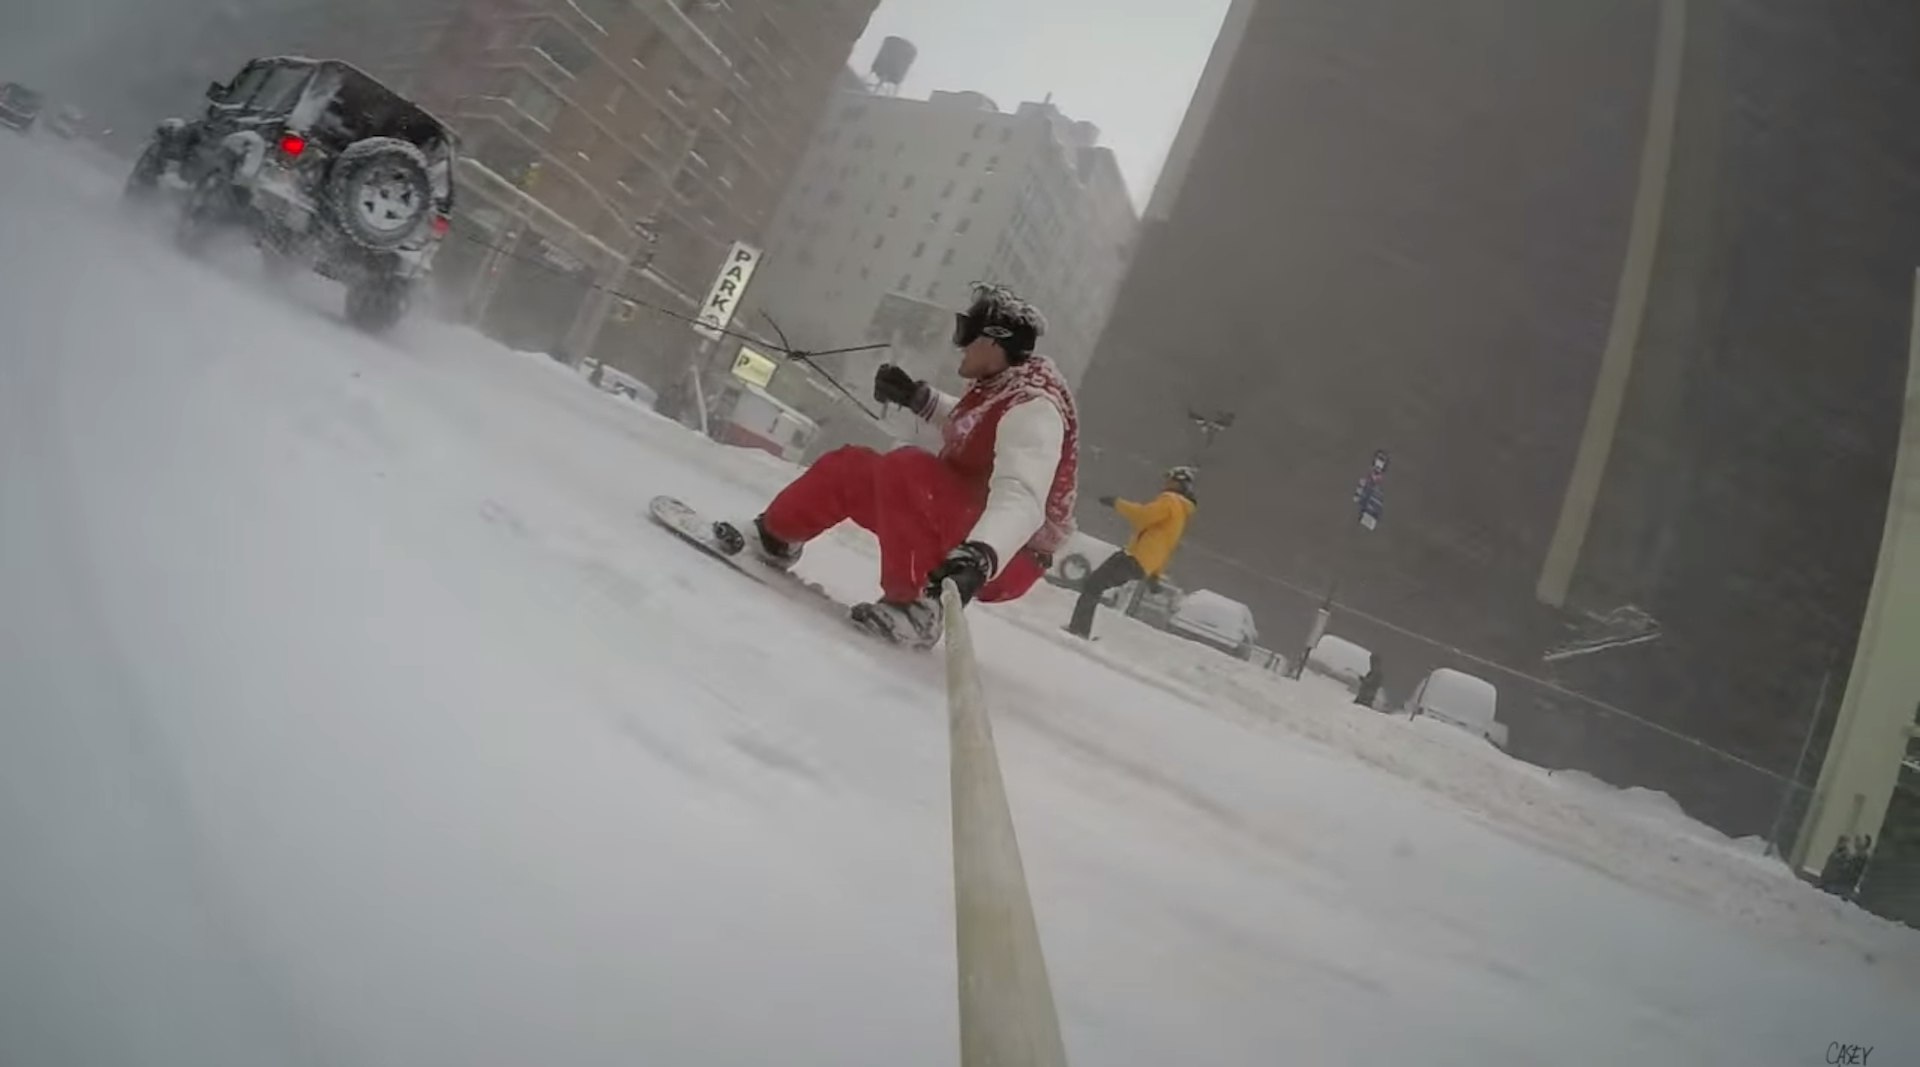 Video: Snowboarding through New York in a snowstorm